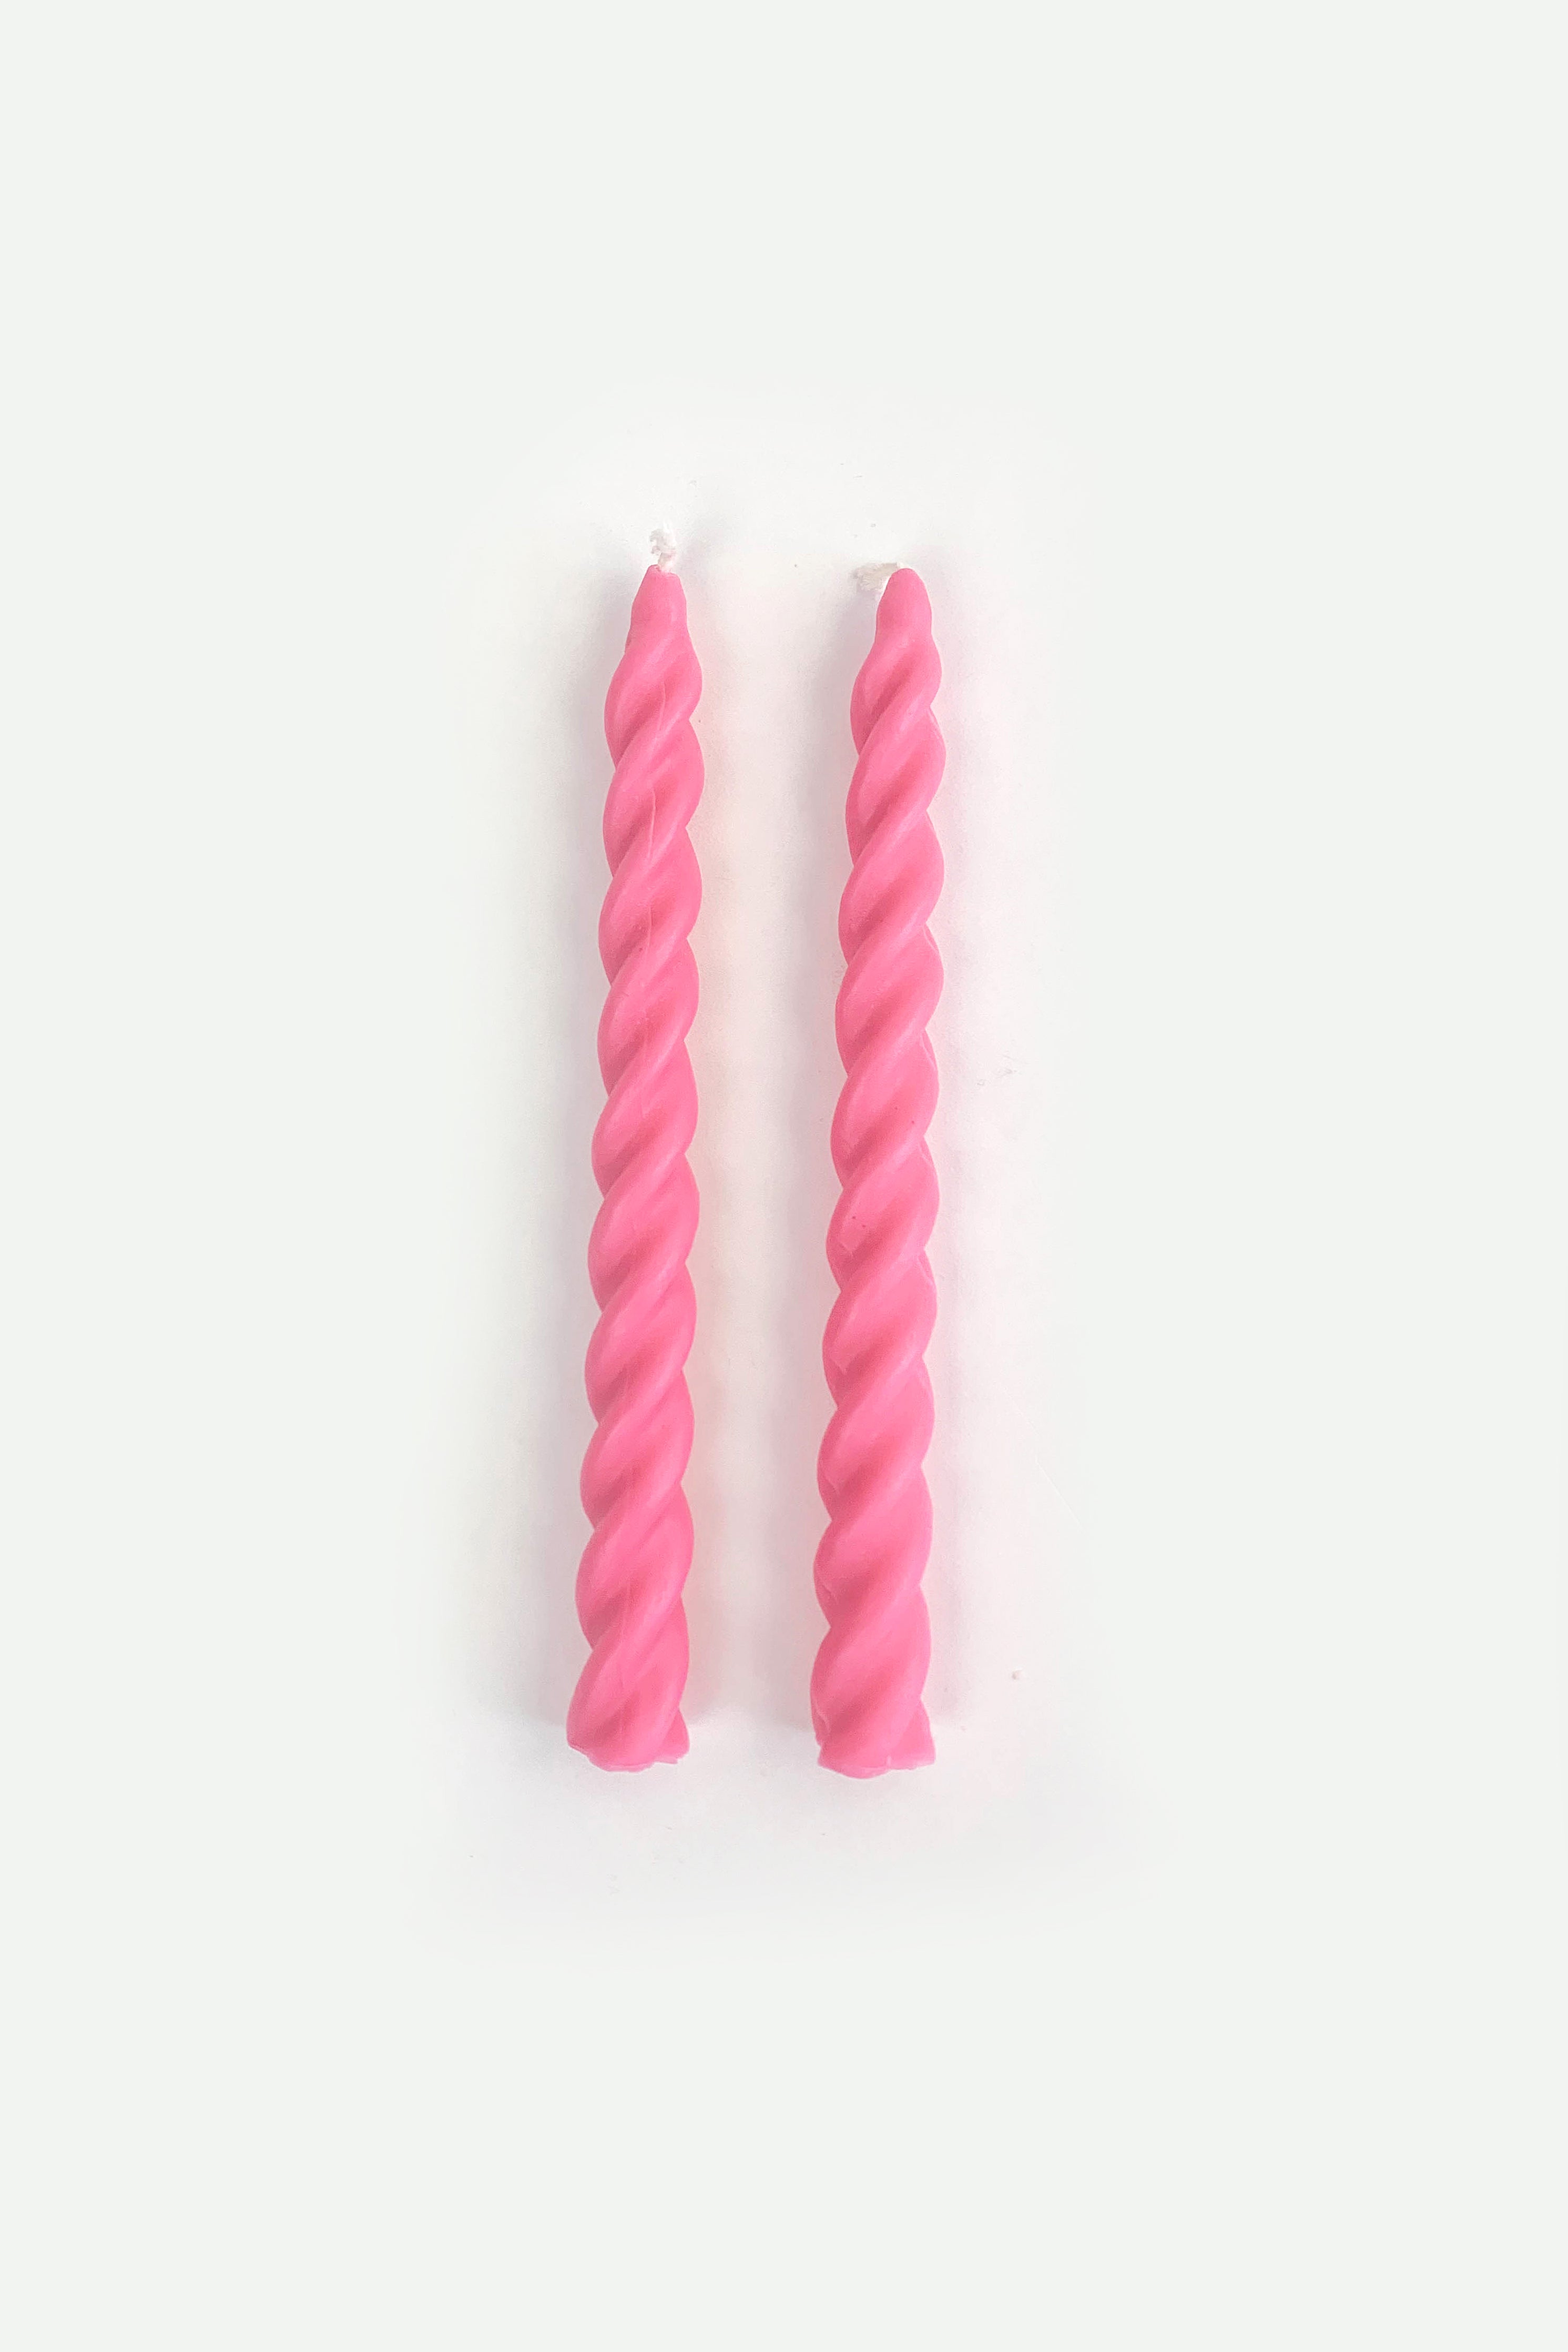 Twisted Taper Candle in Fruit Punch